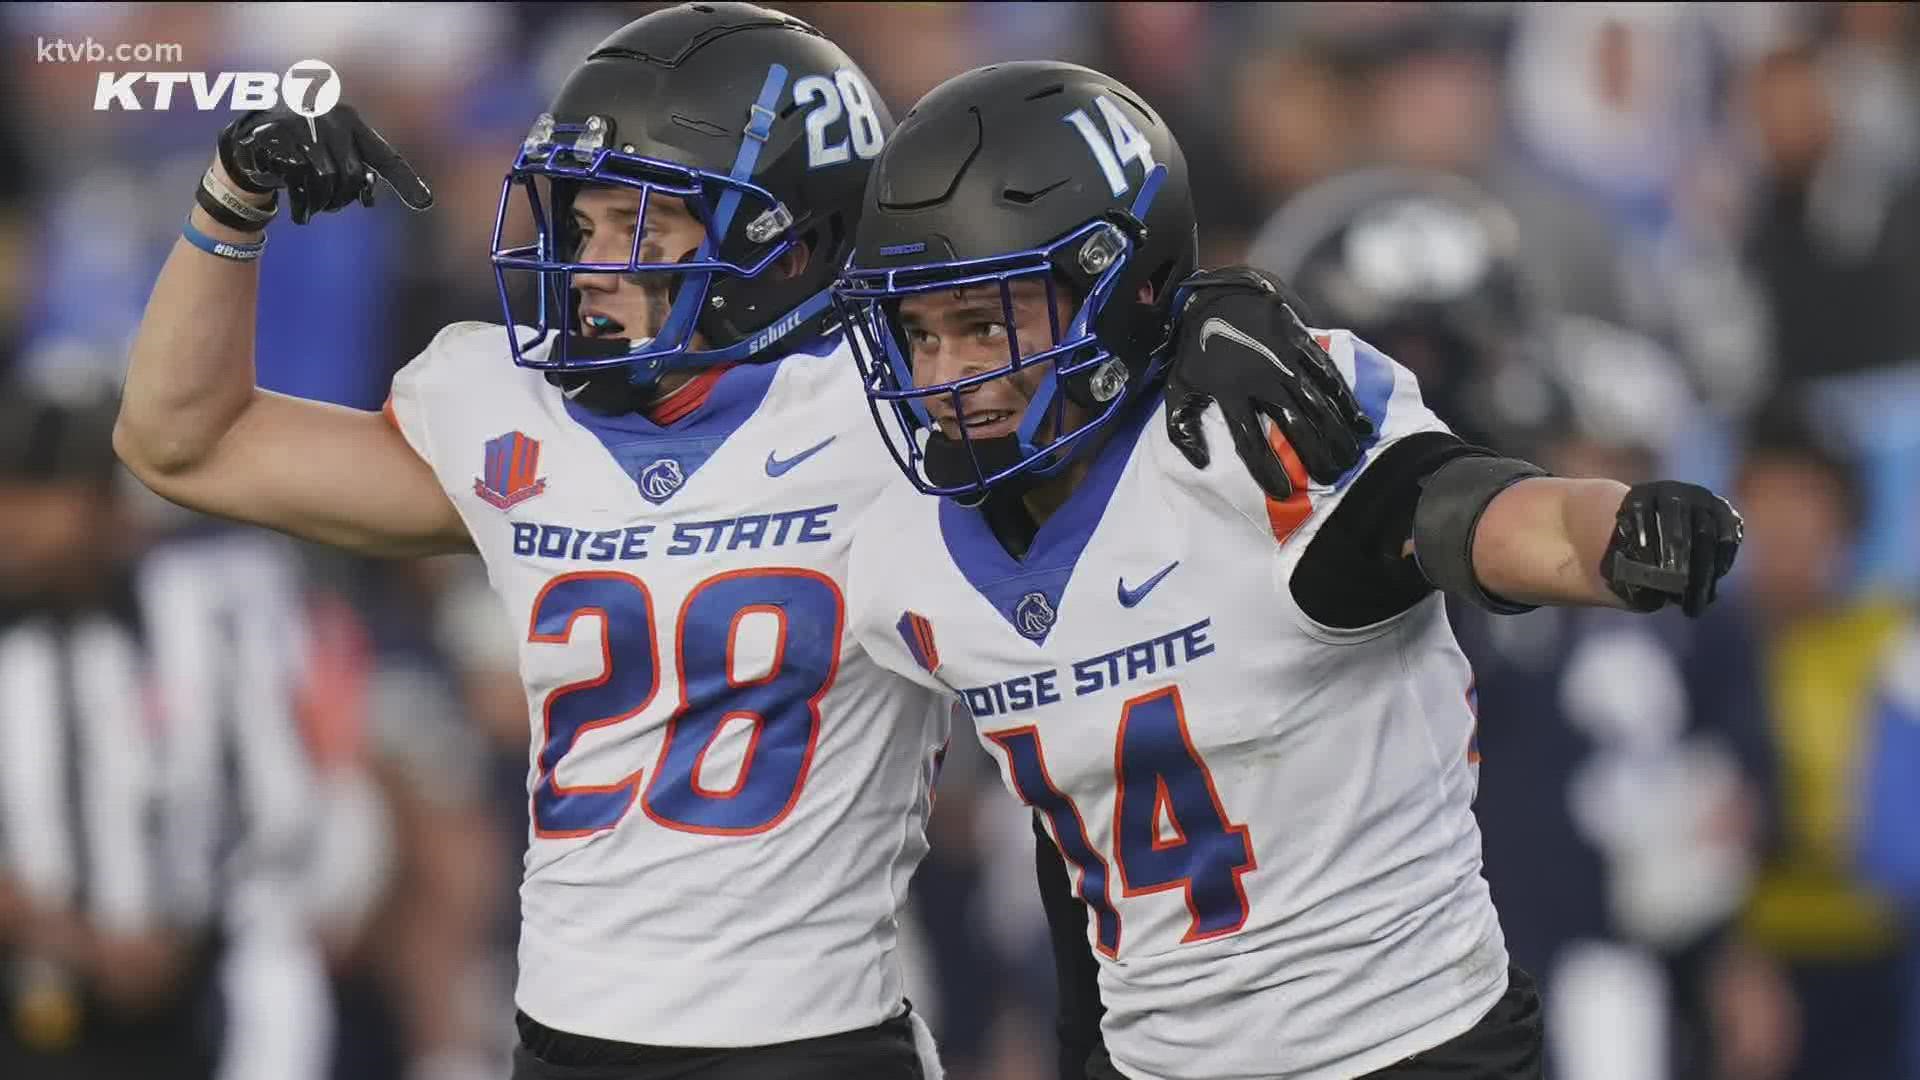 As Keaula Kaniho sets the record for most games played in Boise State history, his little brother is making his own splash as a freshman.